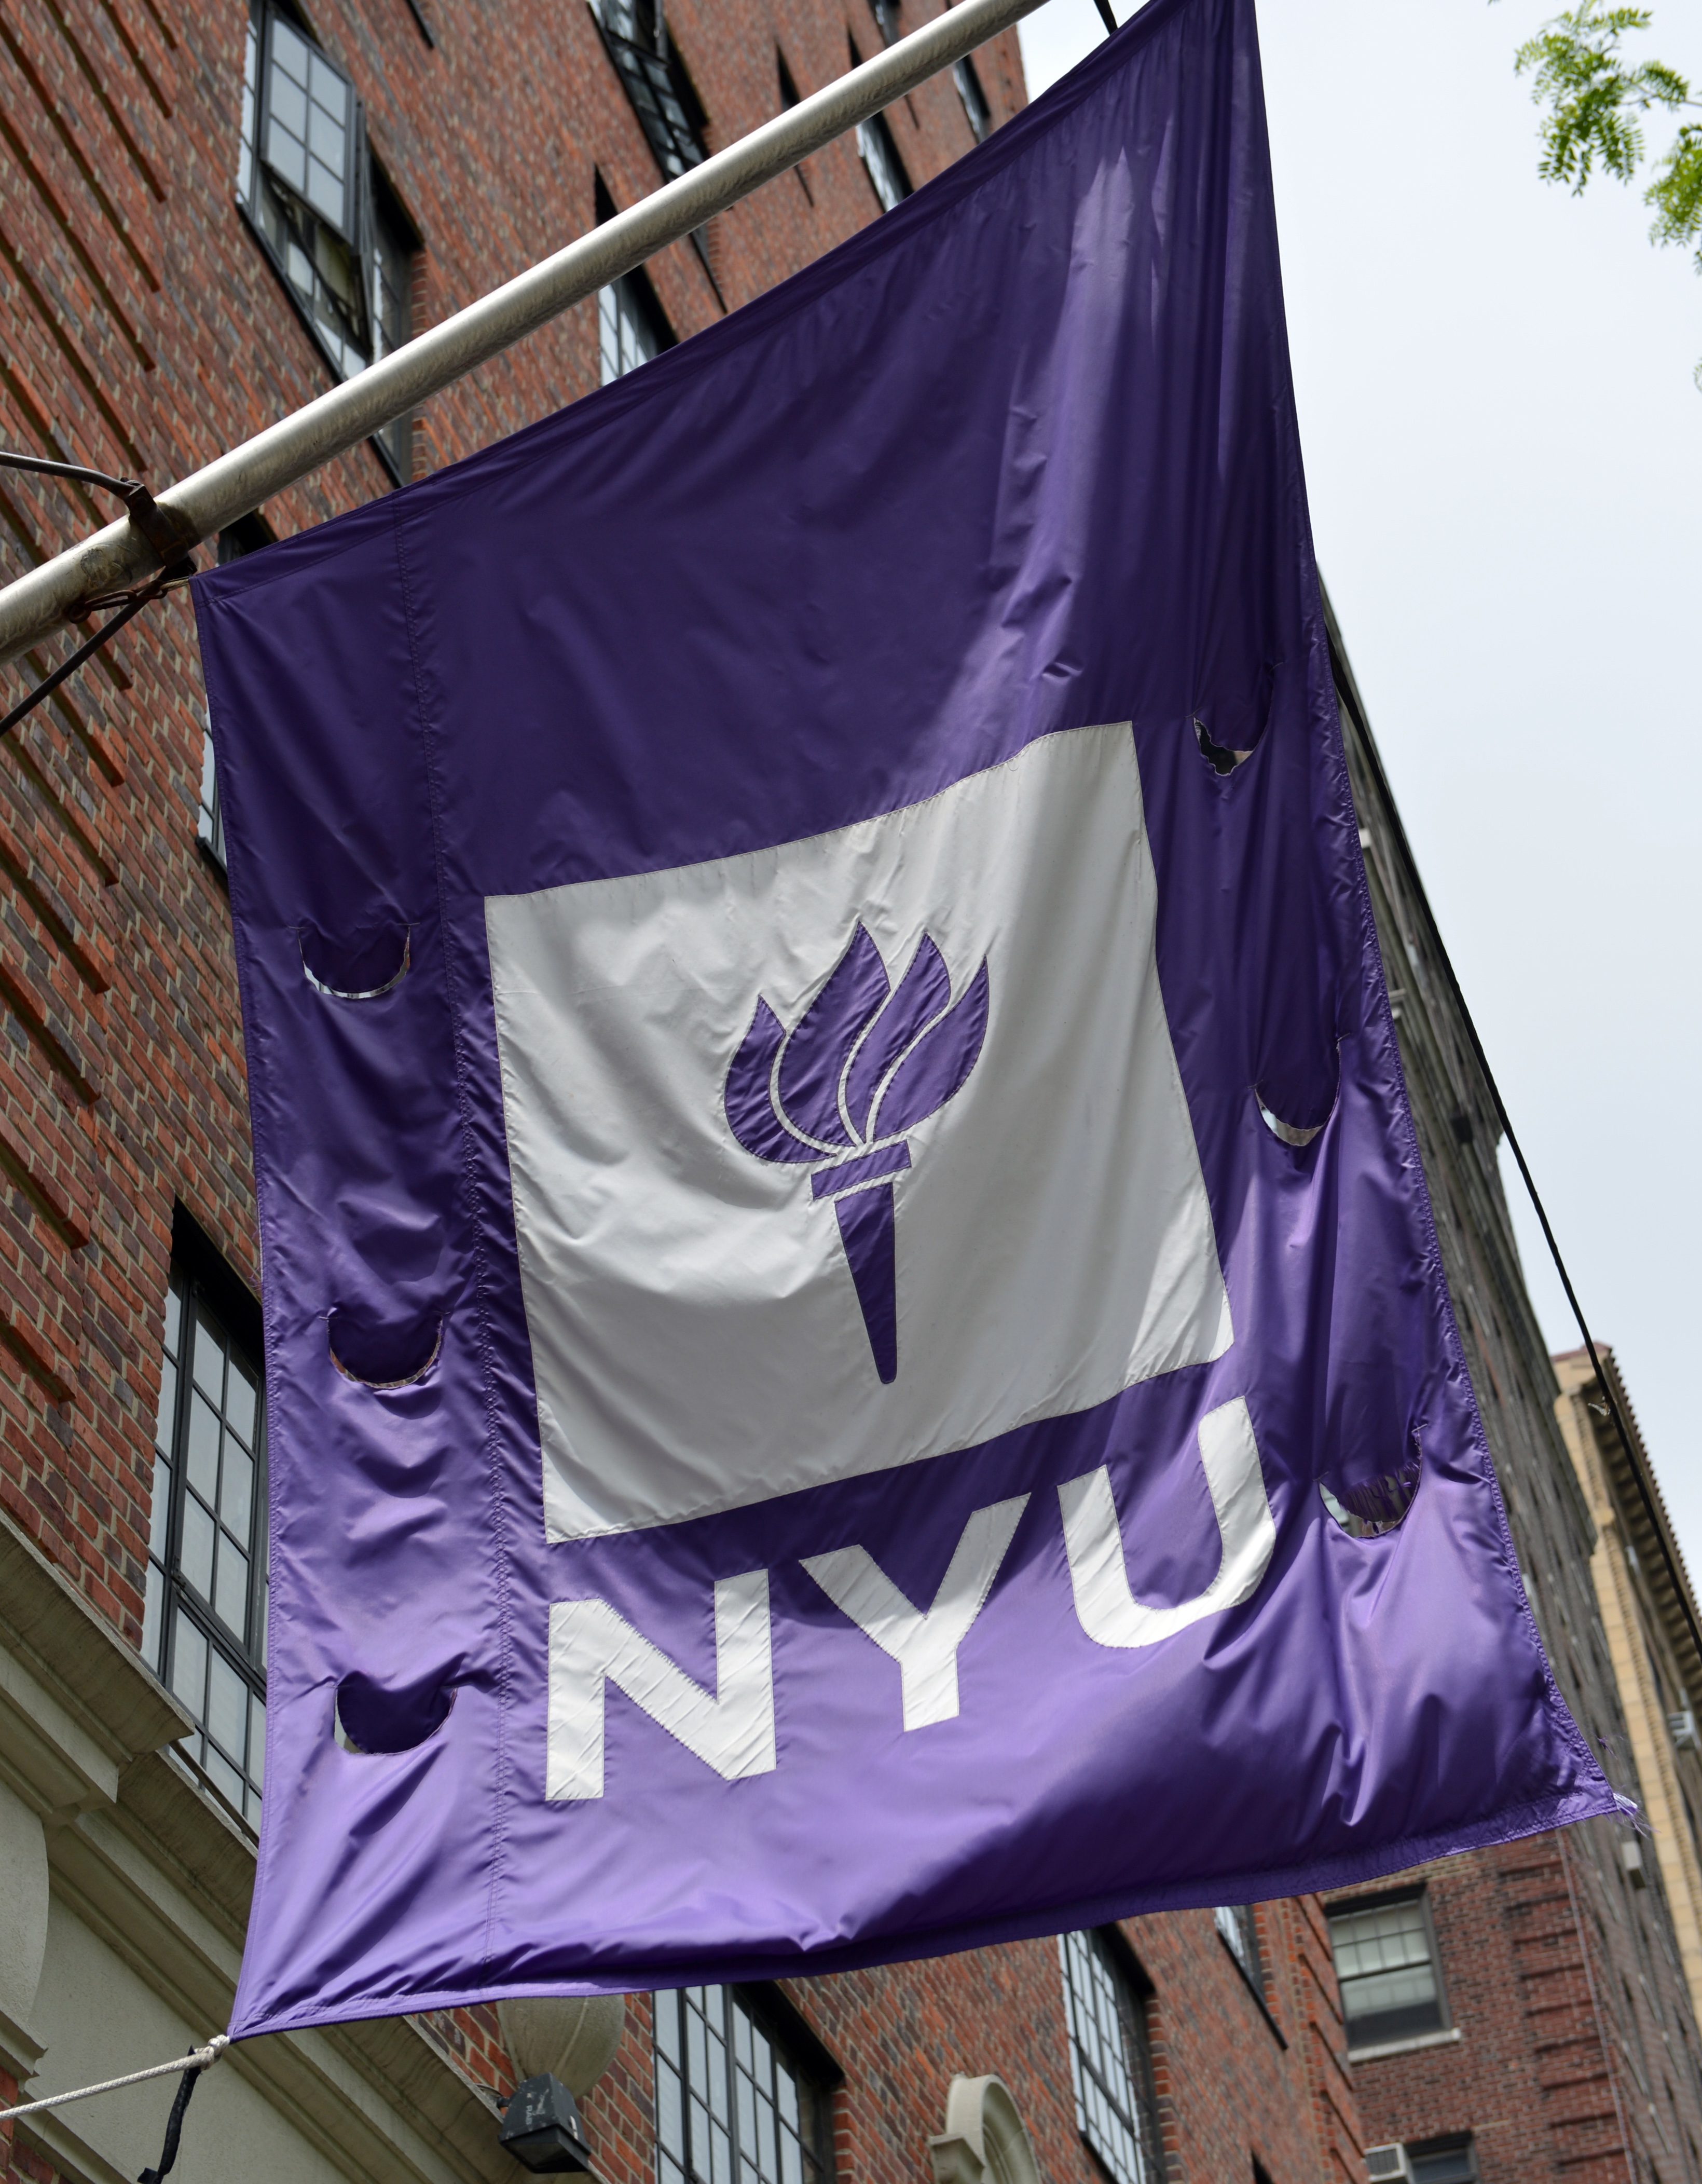 A flag flies from a building at New York University May 4, 2012 in New York. (STAN HONDA—AFP/Getty Images)